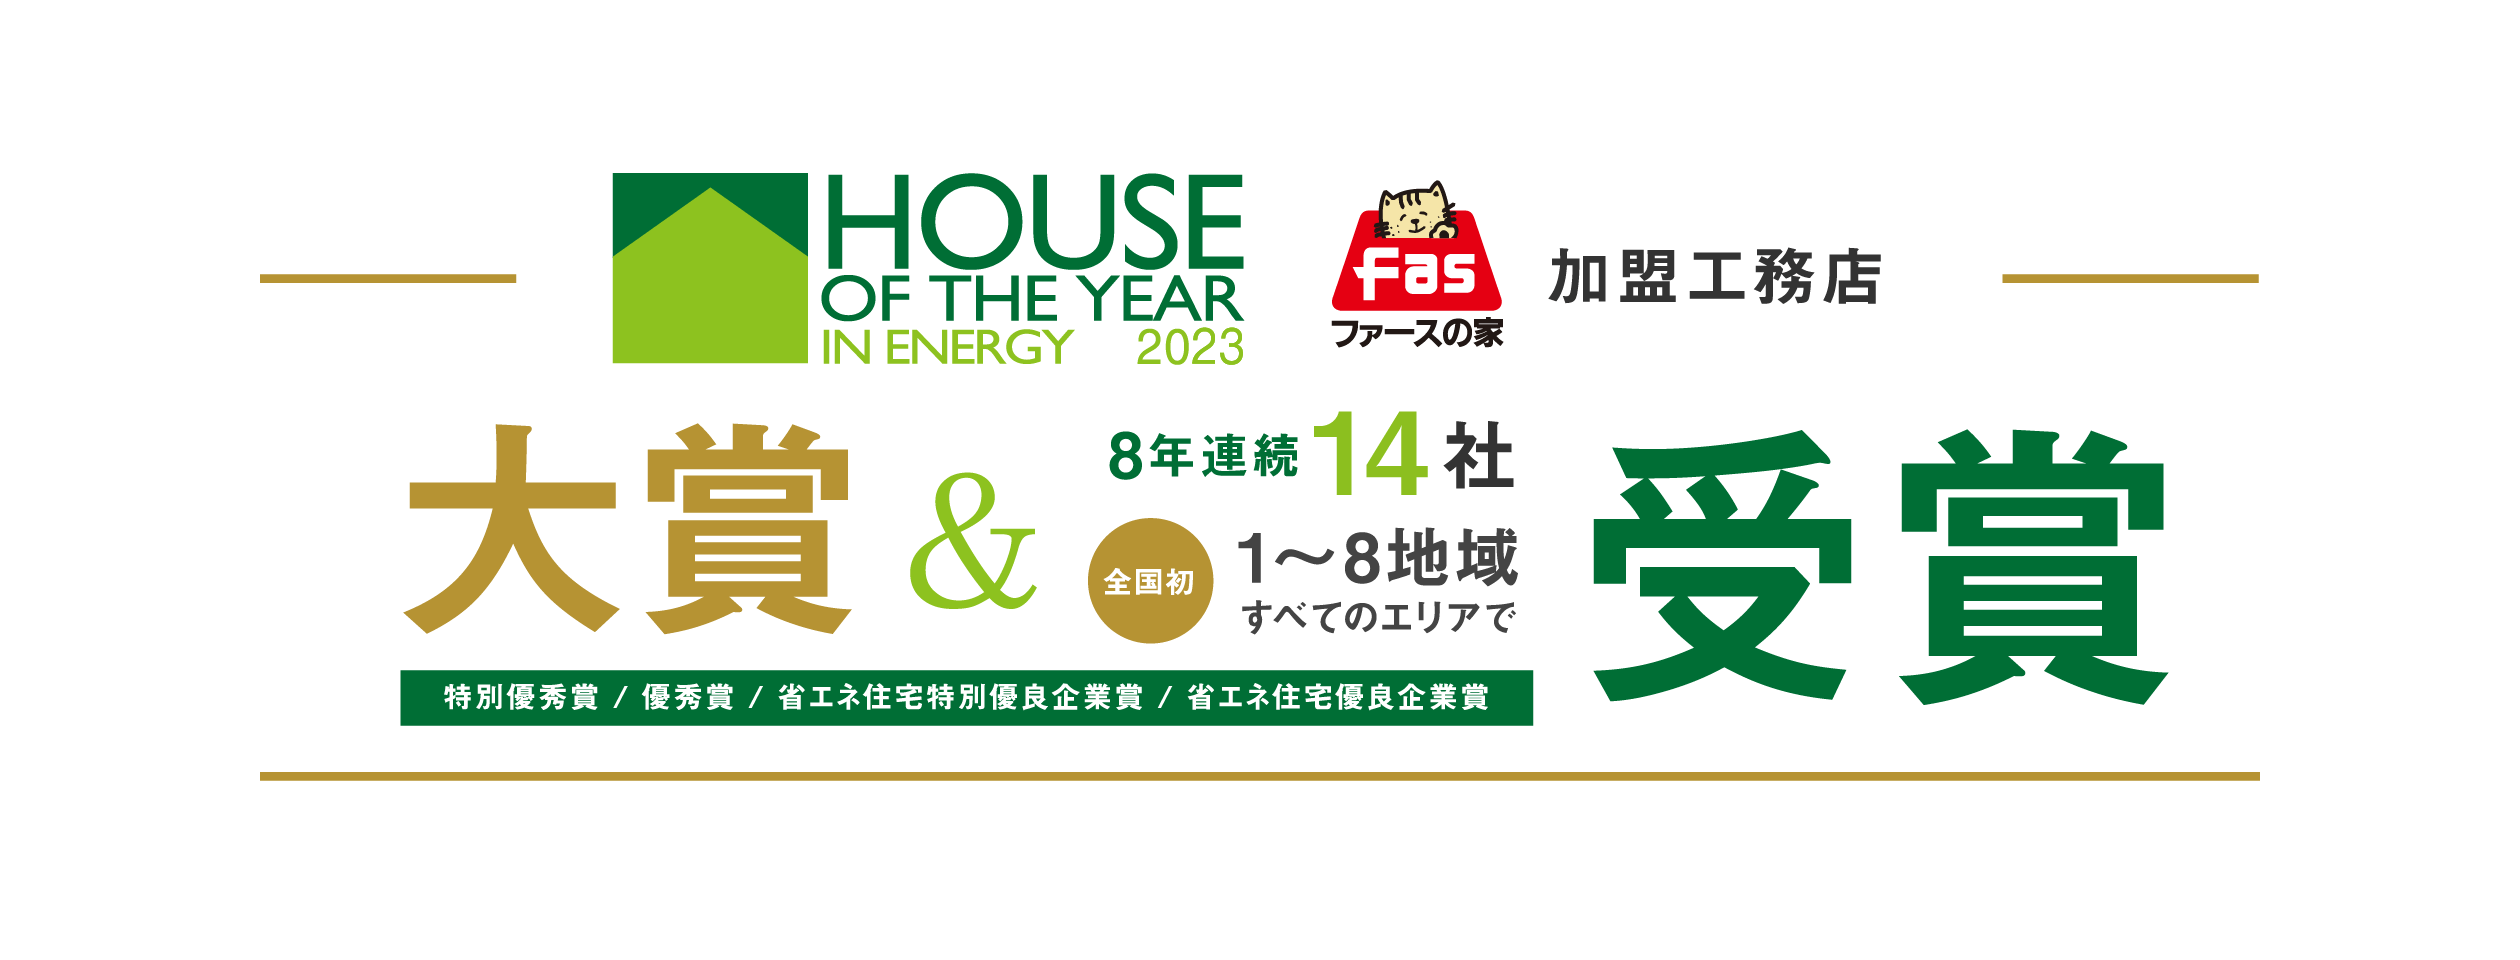 HOUSE OF THE YEAR IN ENERGY